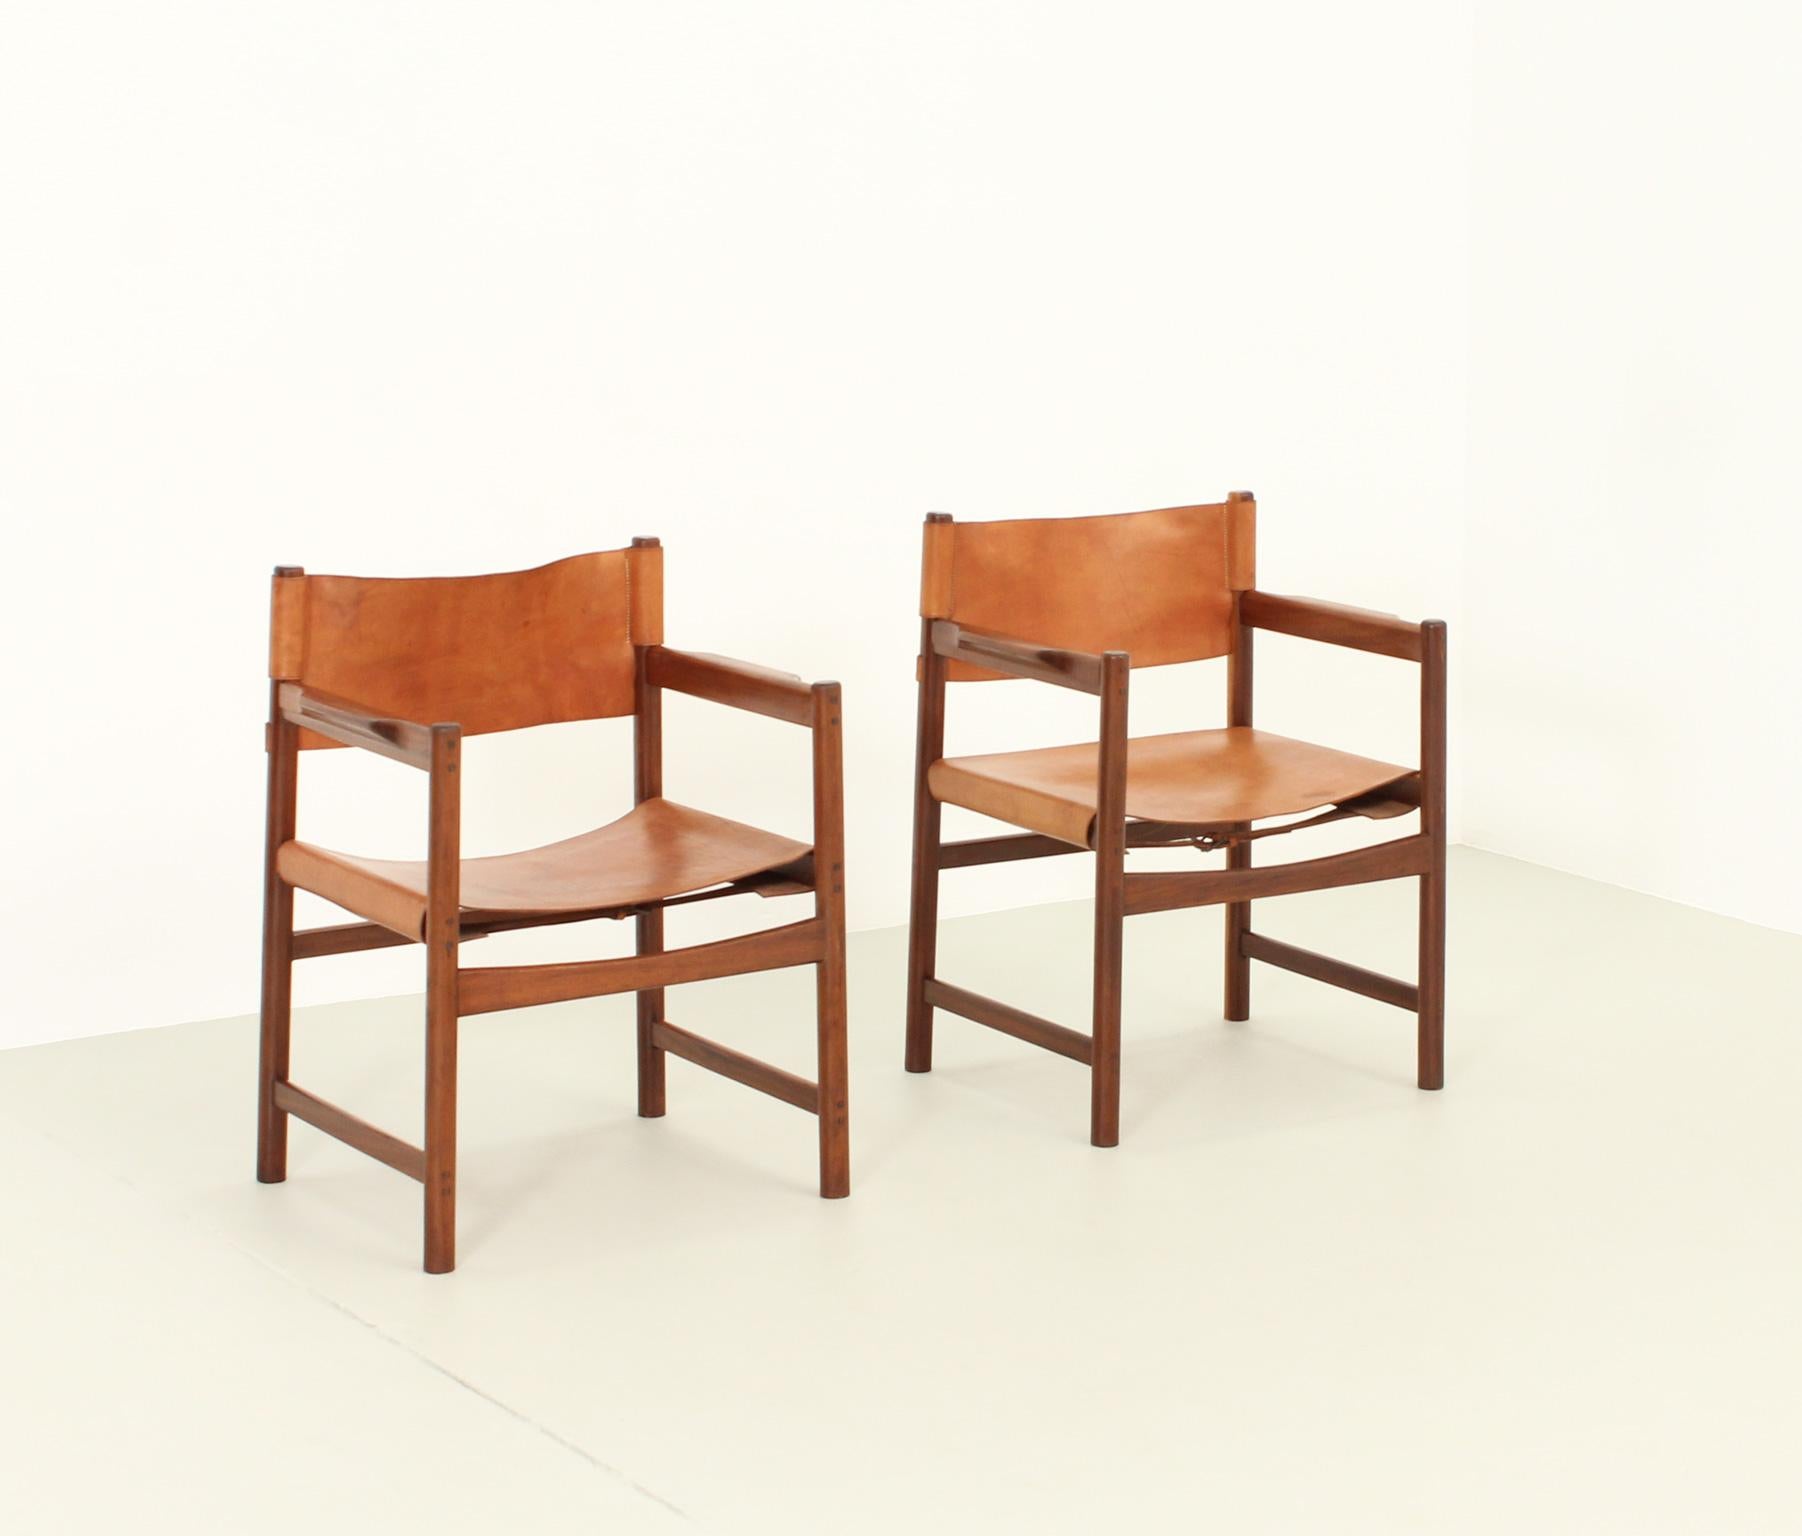 Pair of Spanish Chairs in Cognac Leather, Spain, 1960's 4